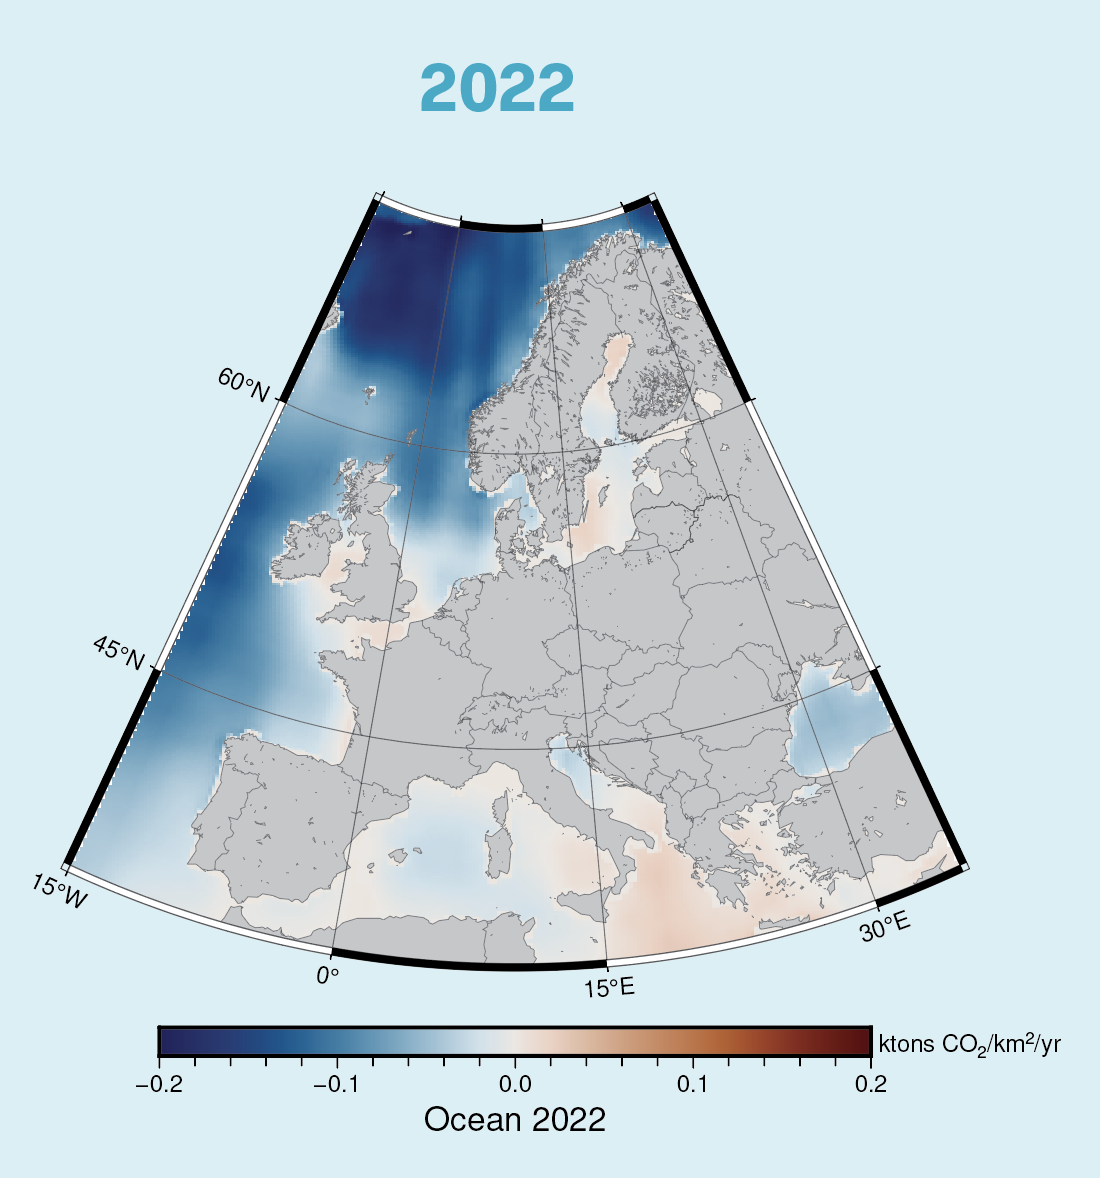 Figure 3. Annual mean net ecosystem exchange of oceans and coastal regions around Europe from 2018 to 2022.